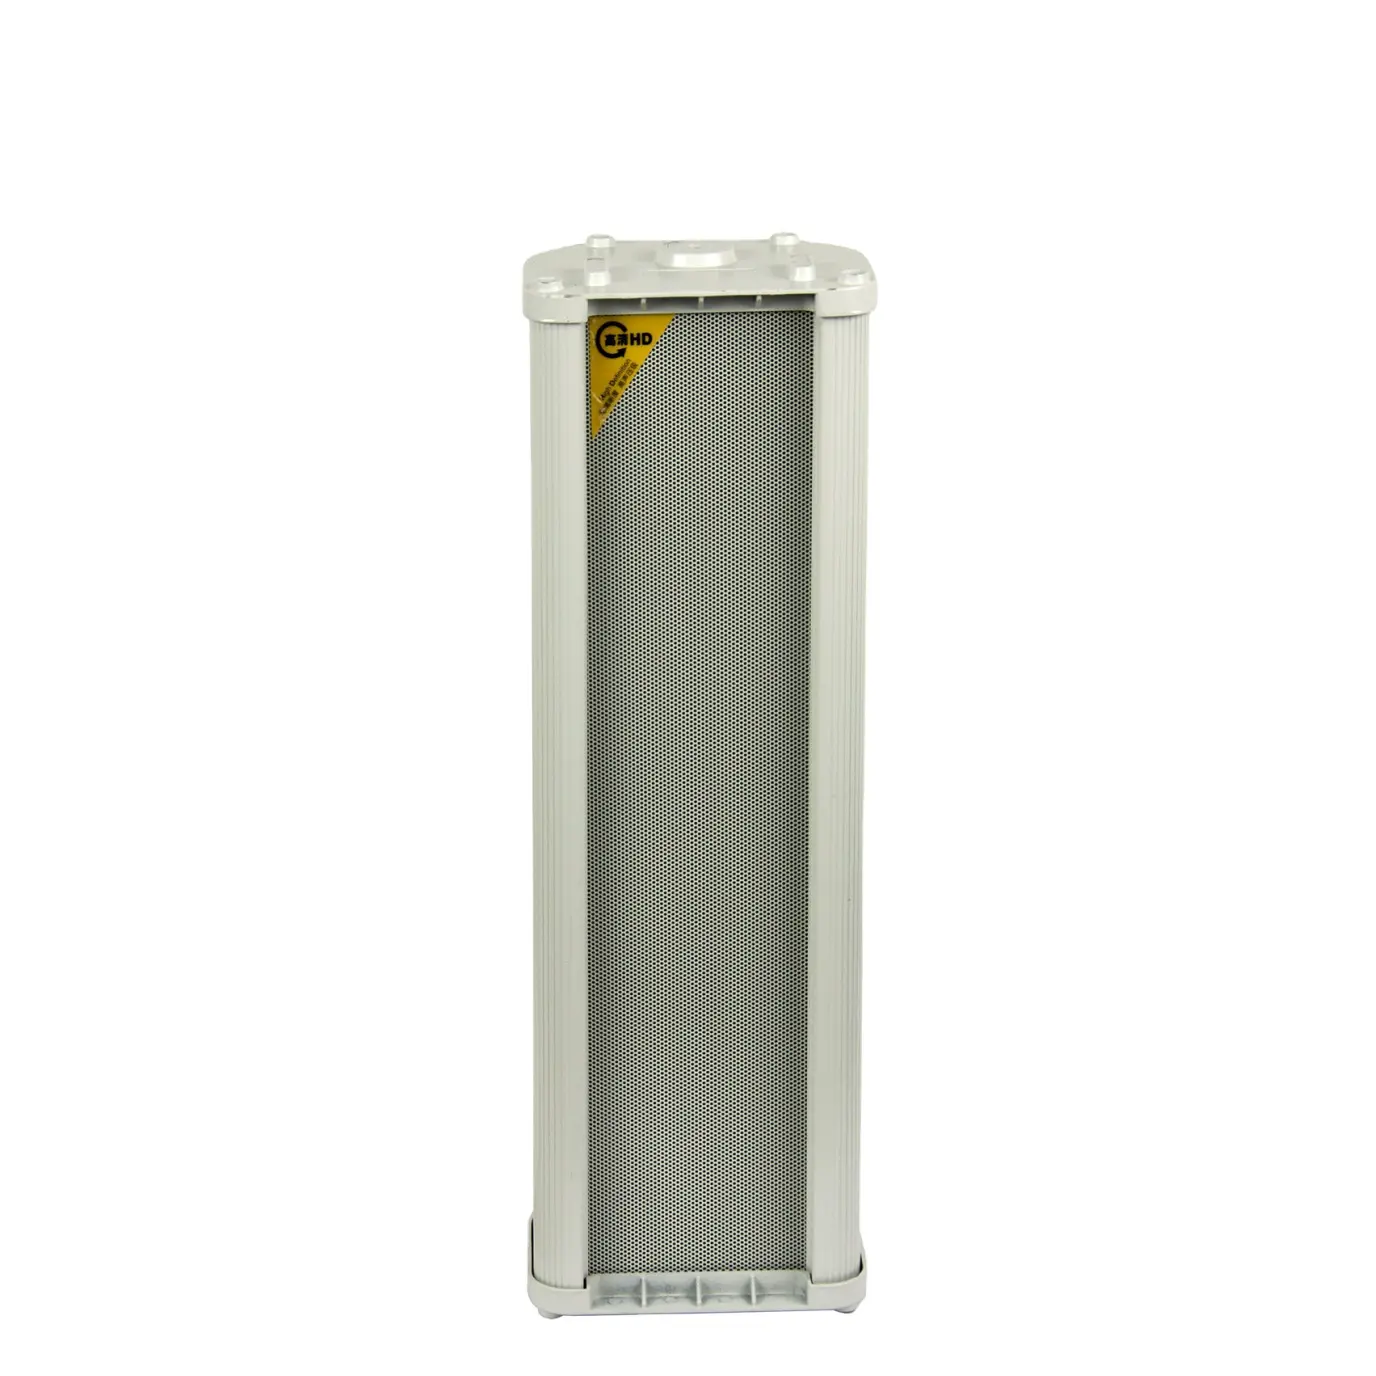 Professional PA System All weather Outdoor Waterproof 100v Column Speaker Made in China